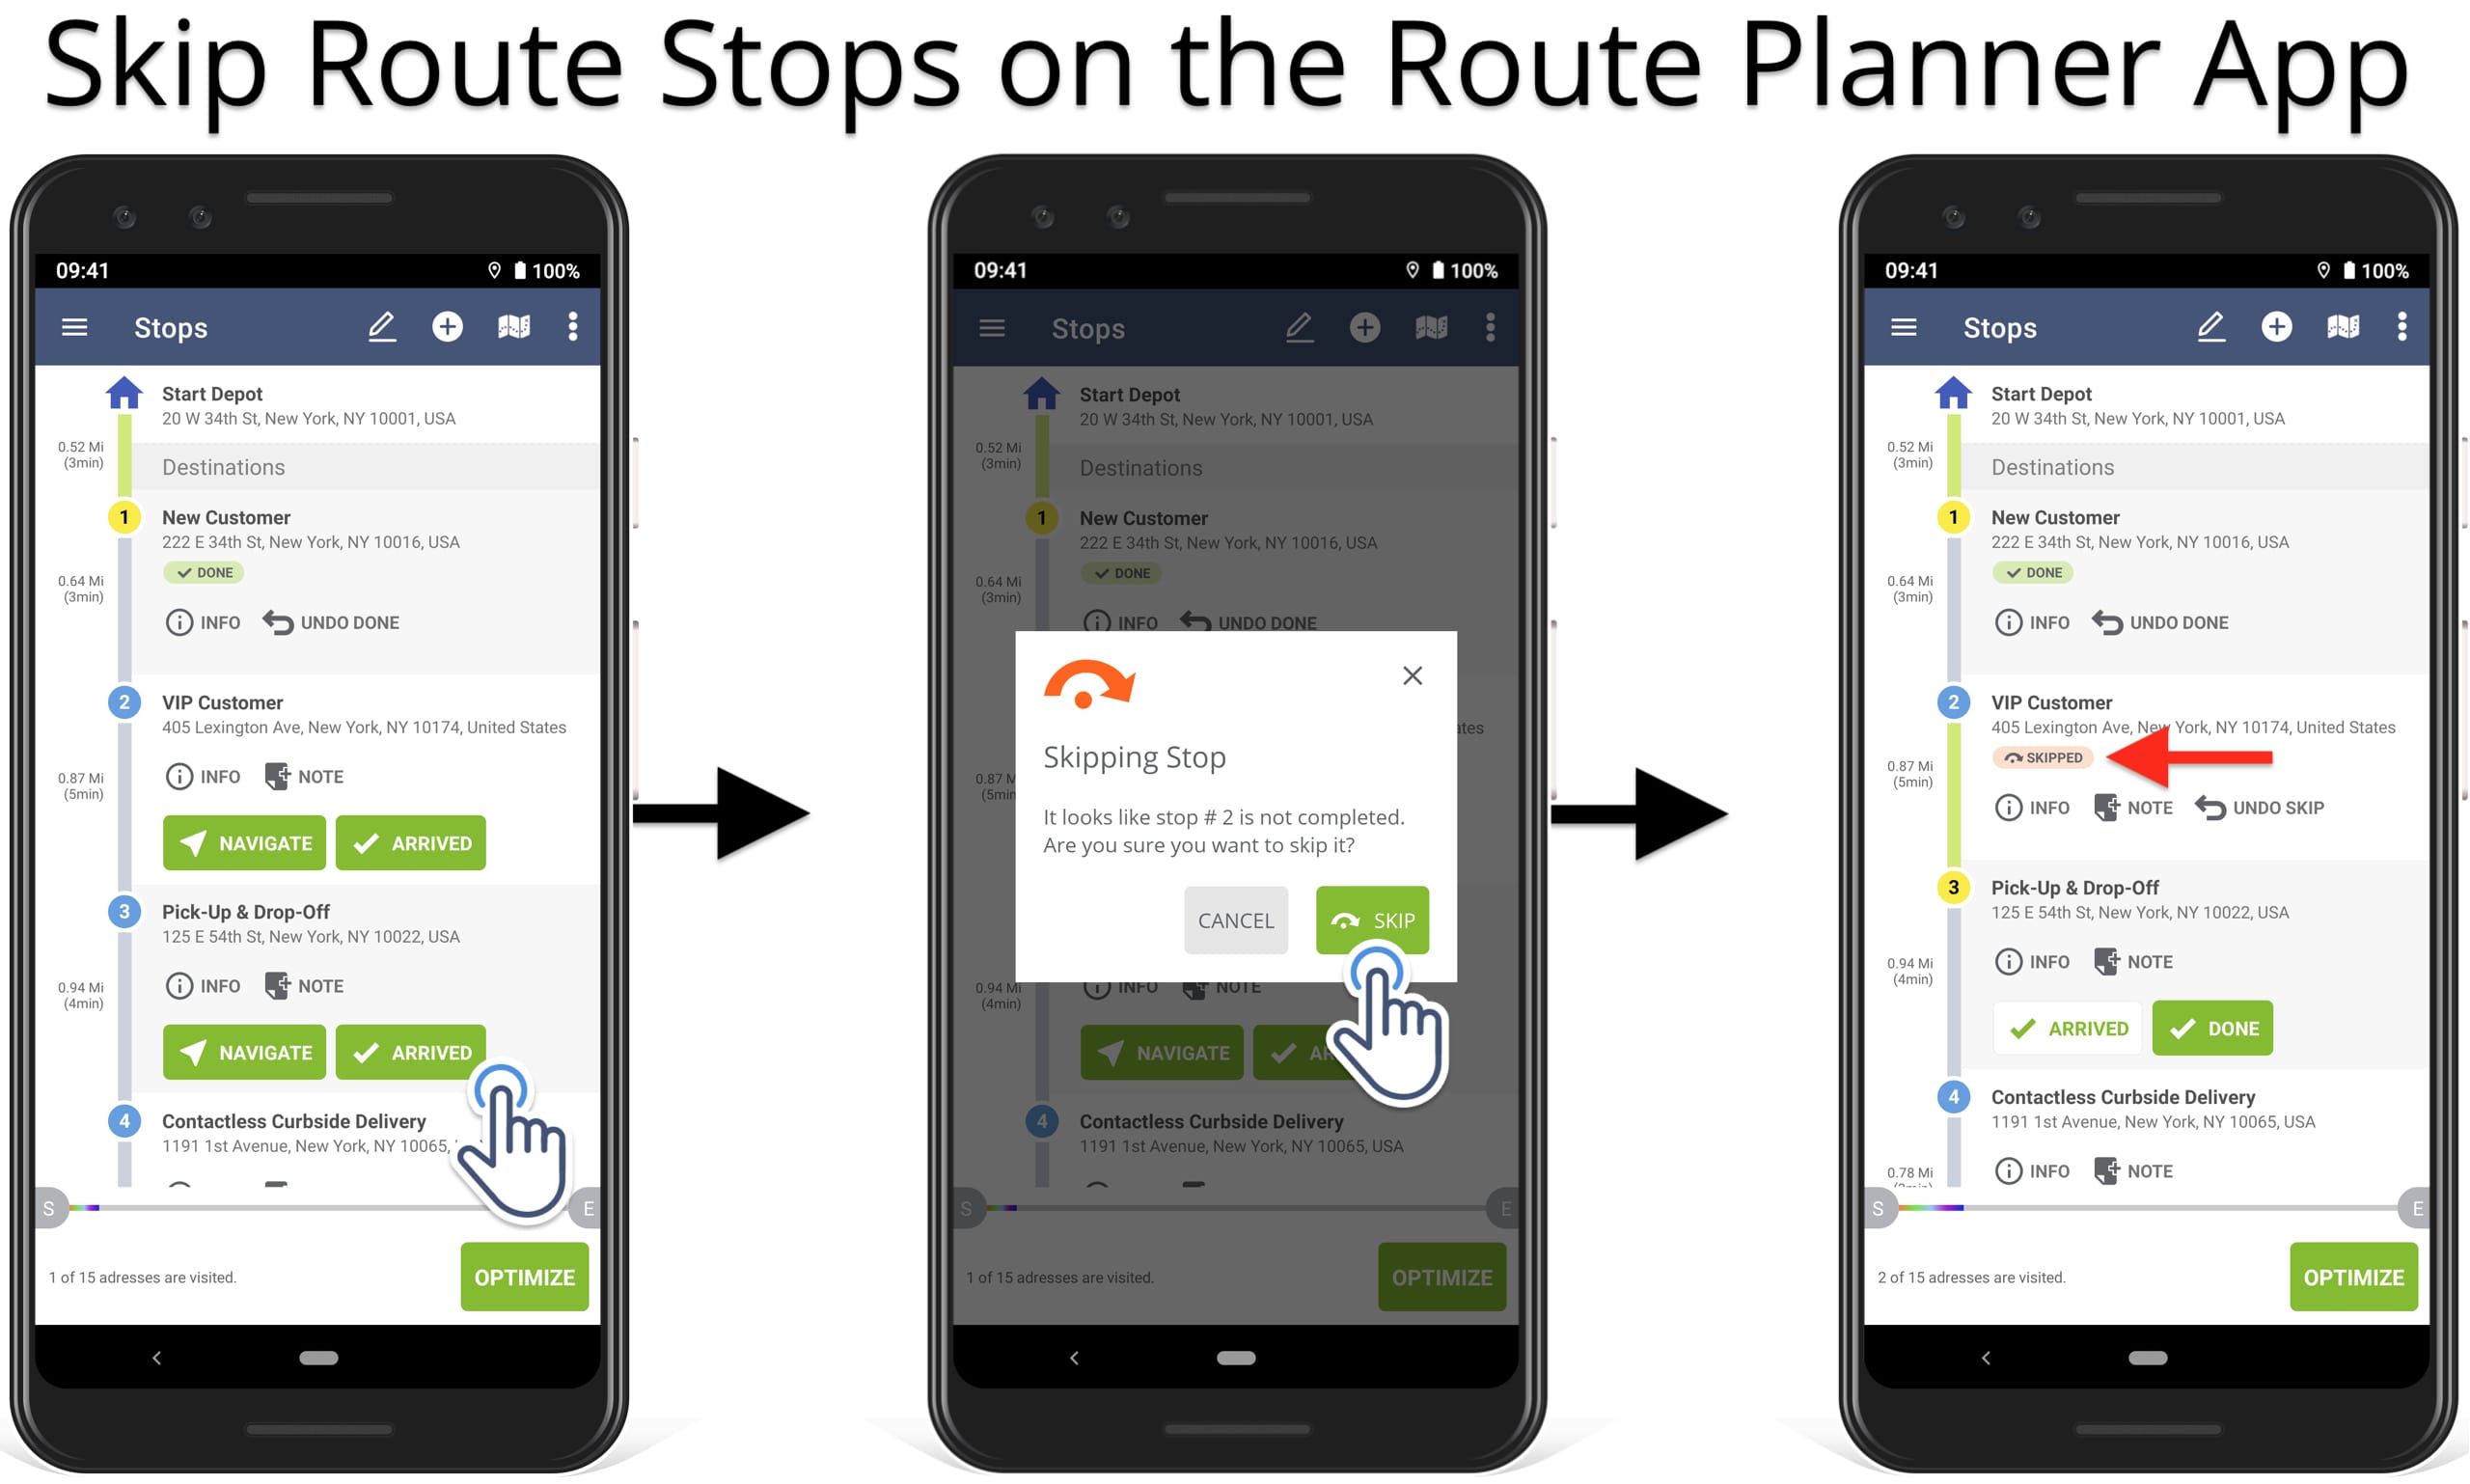 Skip route stops when navigating and tracking delivery route progress on the route planner app.